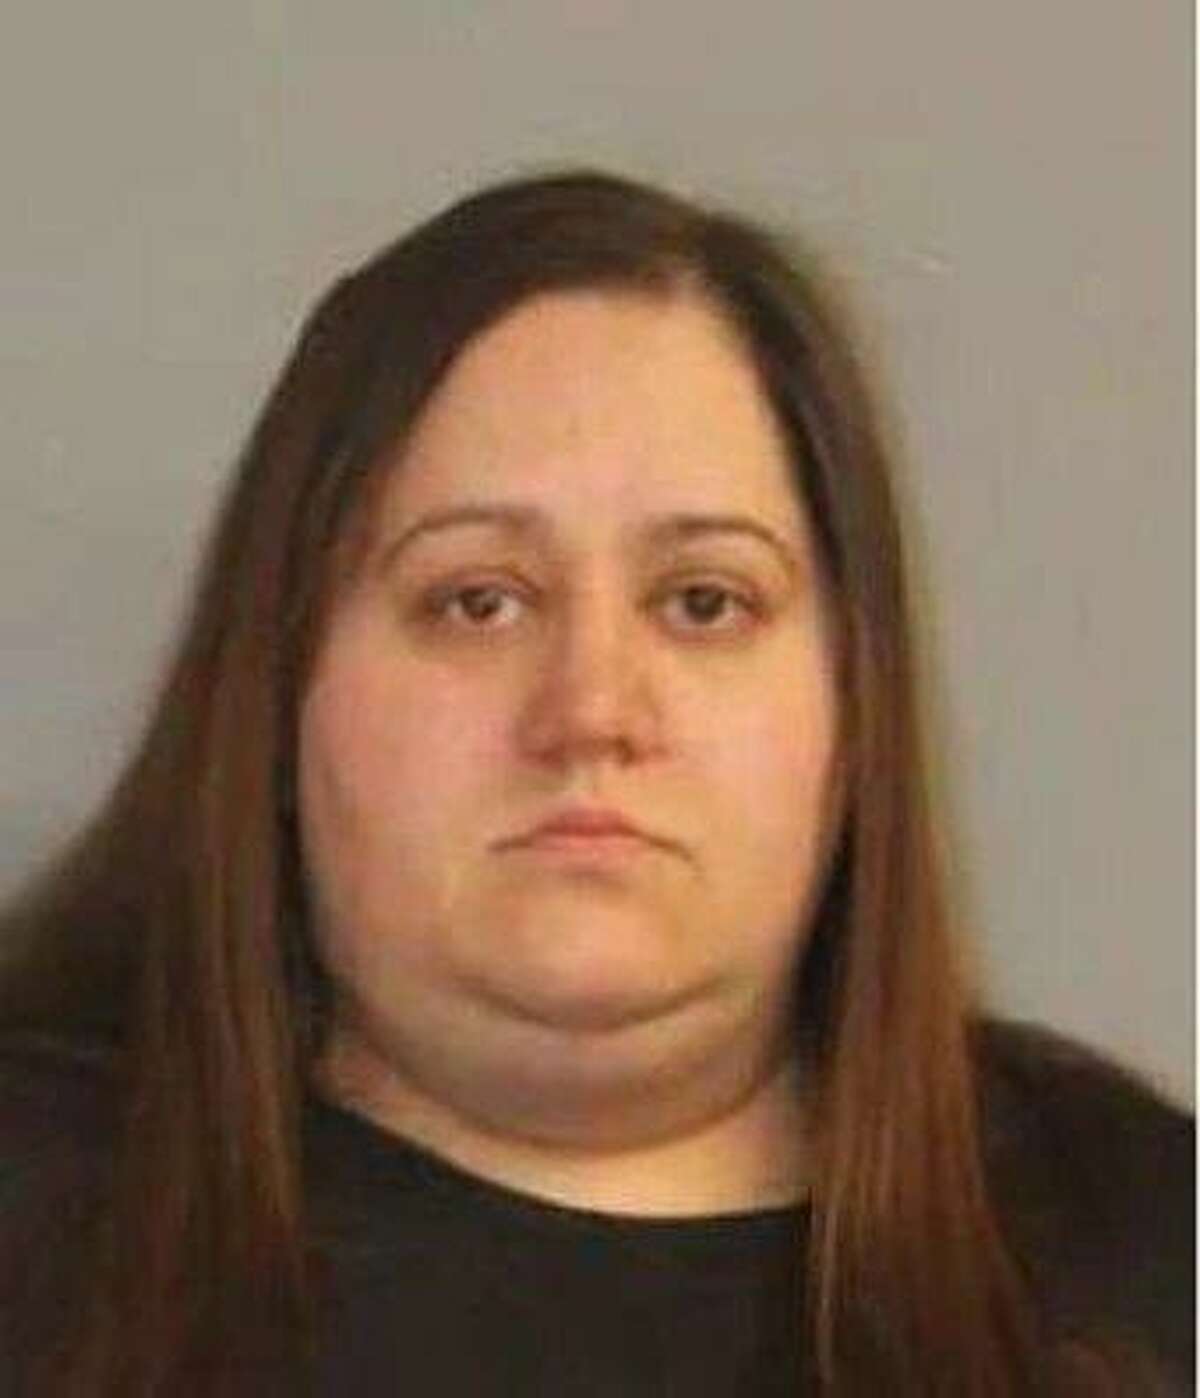 Jacqueline “Jackie” Barbour, 34, was charged with cruelty to persons and risk of injury to a minor.